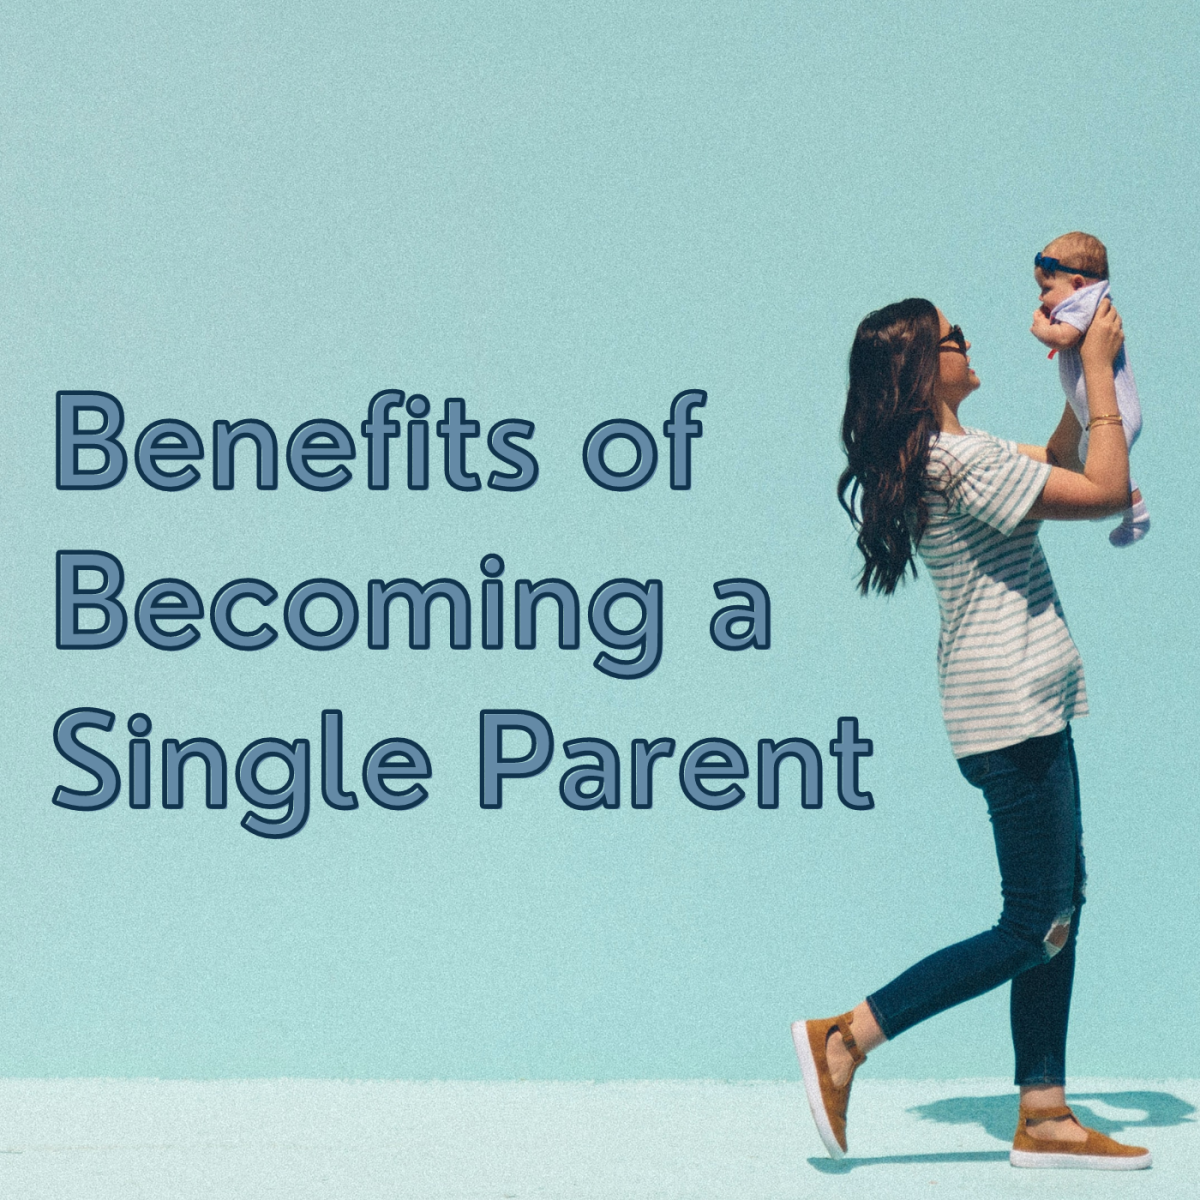 Let's celebrate the many positives of single parenthood!